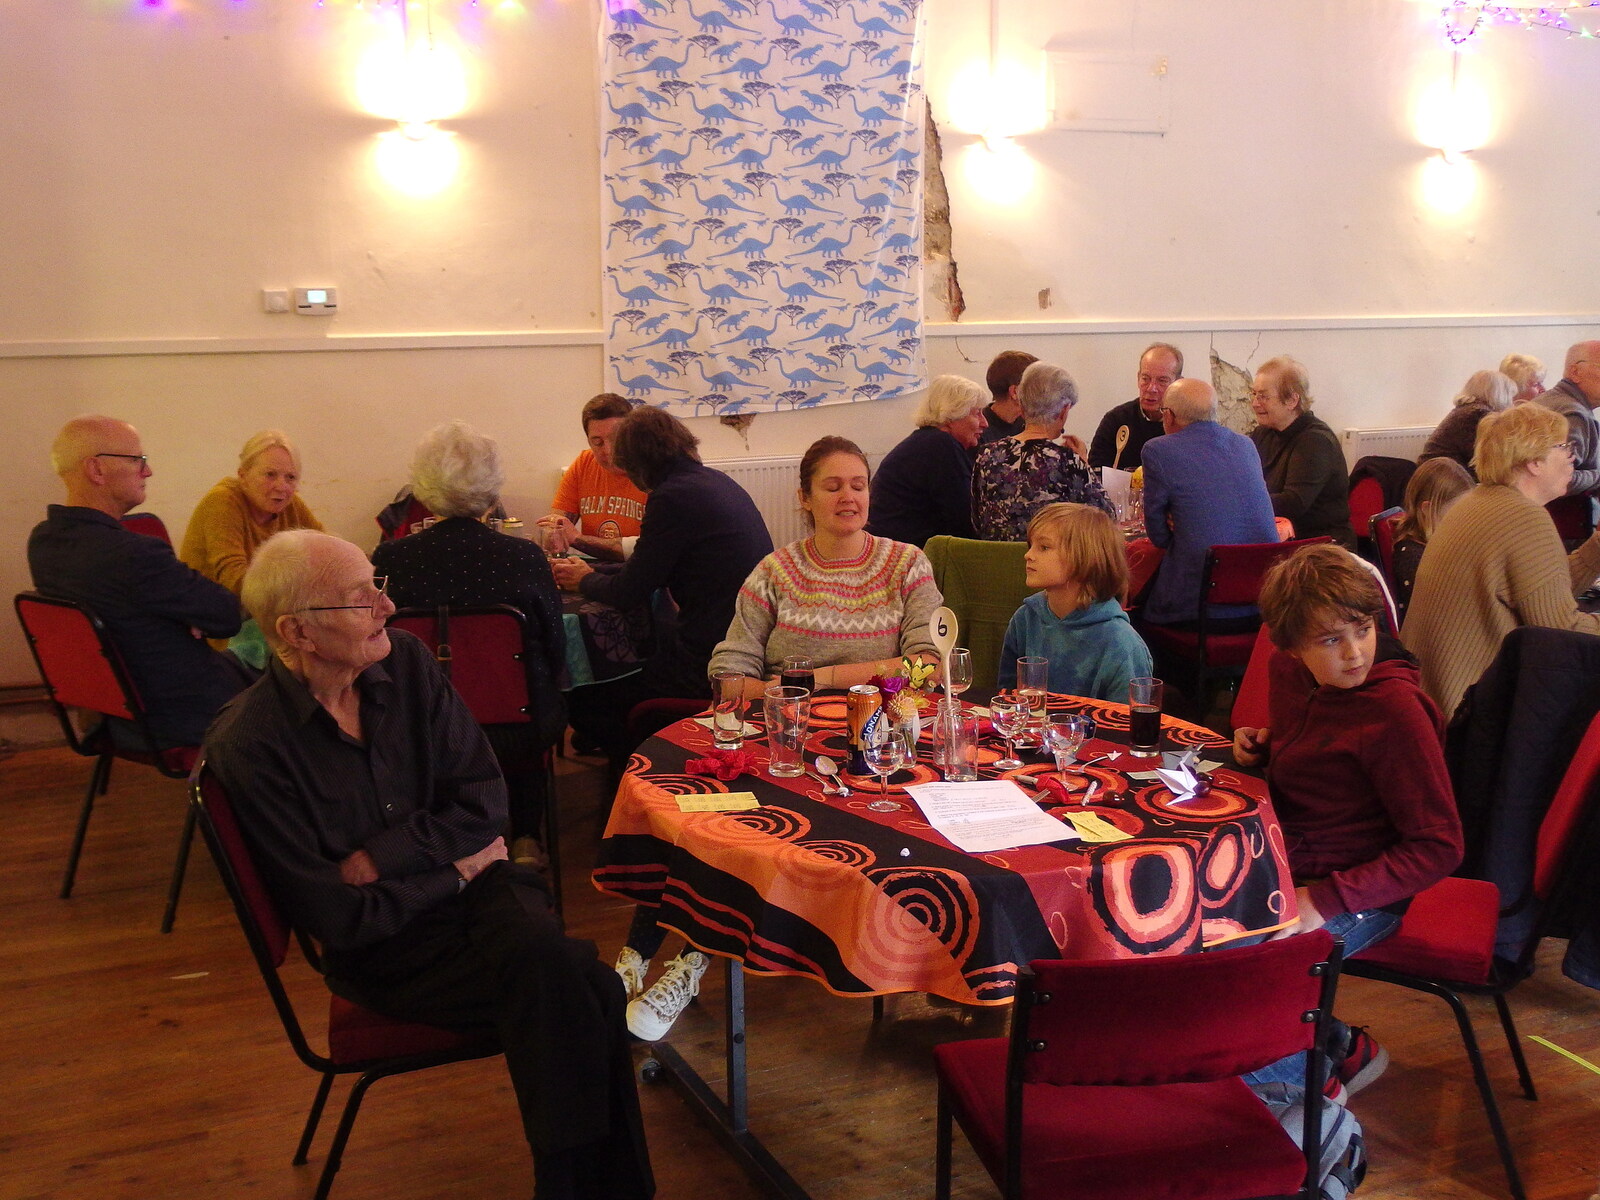 Our Sunday Lunch table from Sunday Lunch at the Village Hall, Brome, Suffolk - 10th October 2021